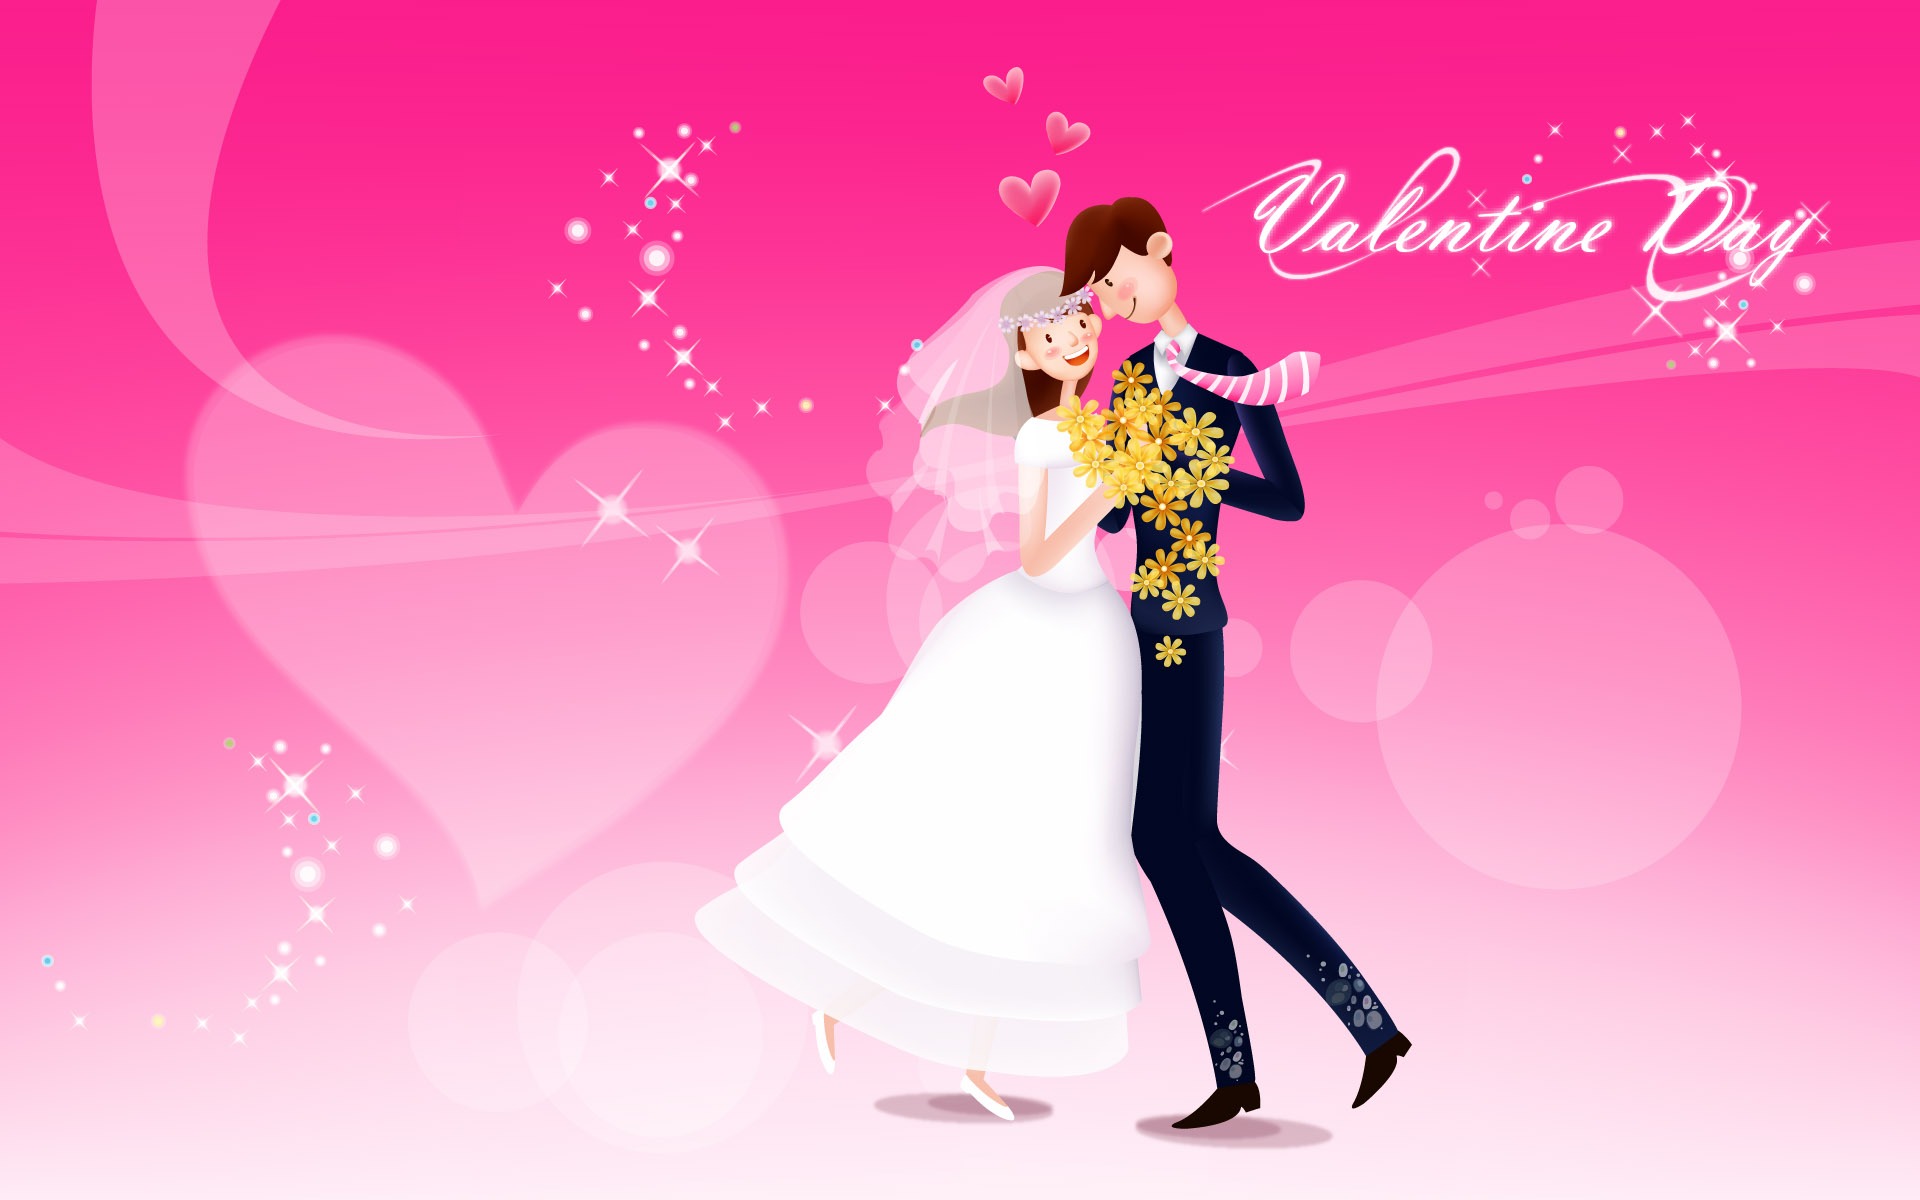 Valentine's Day Theme Wallpapers (2) #16 - 1920x1200